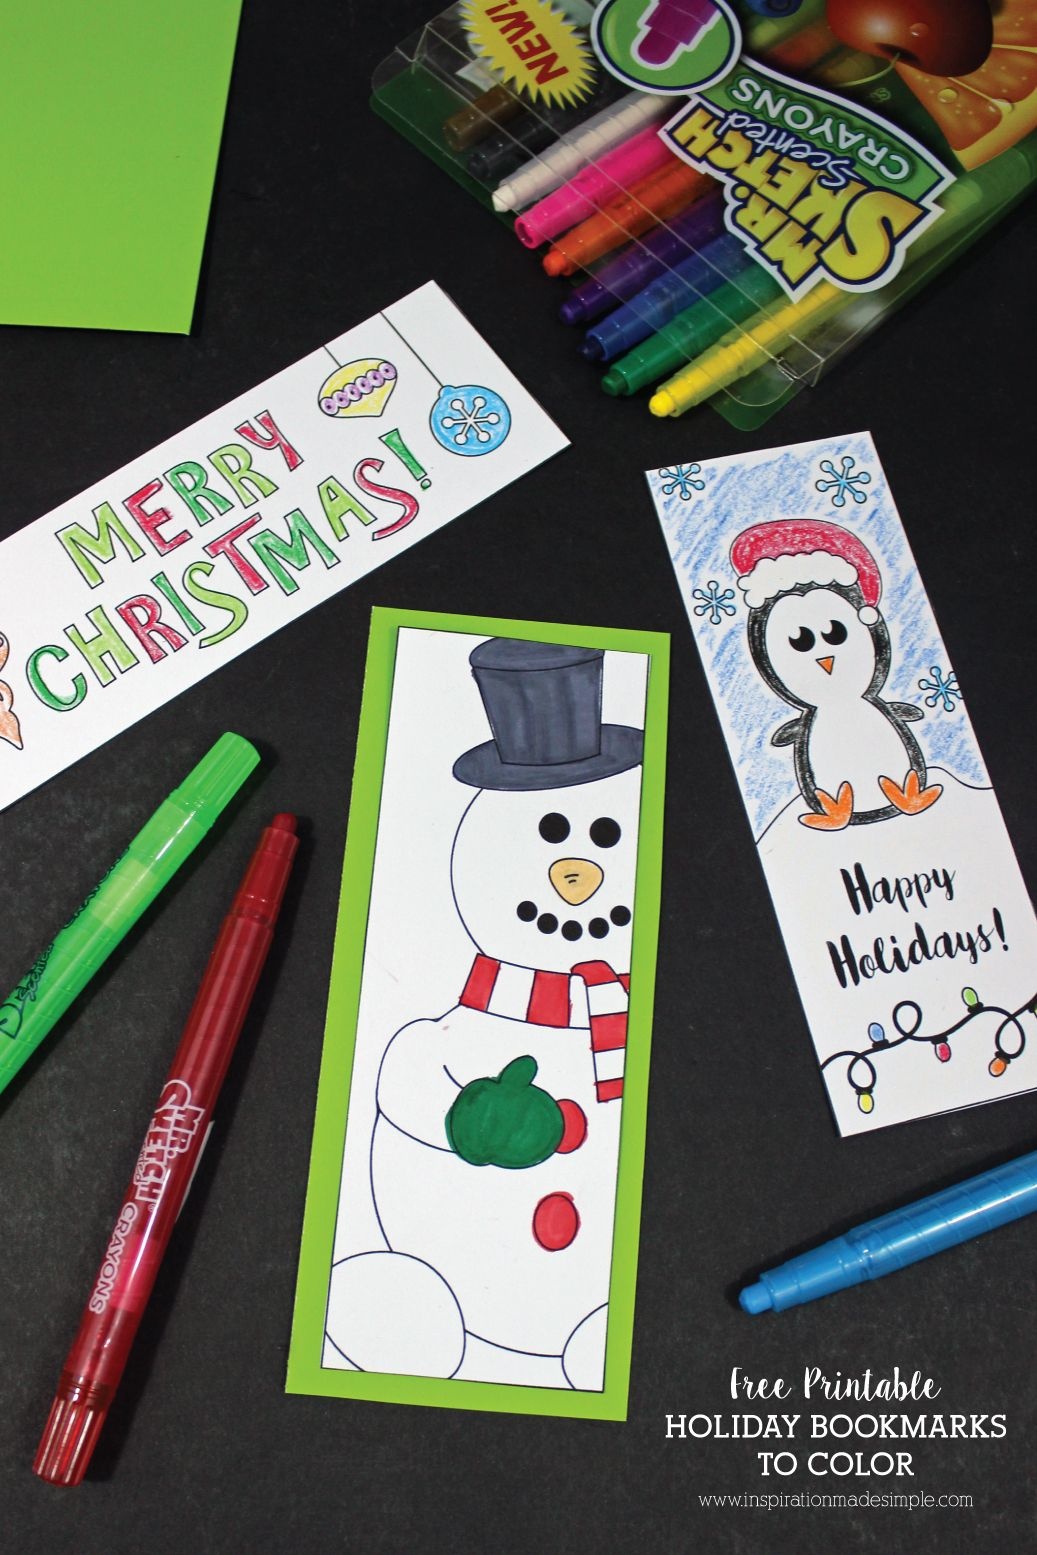 Printable Holiday Bookmarks To Color | Kid Blogger Network - Free Printable Christmas Bookmarks To Color